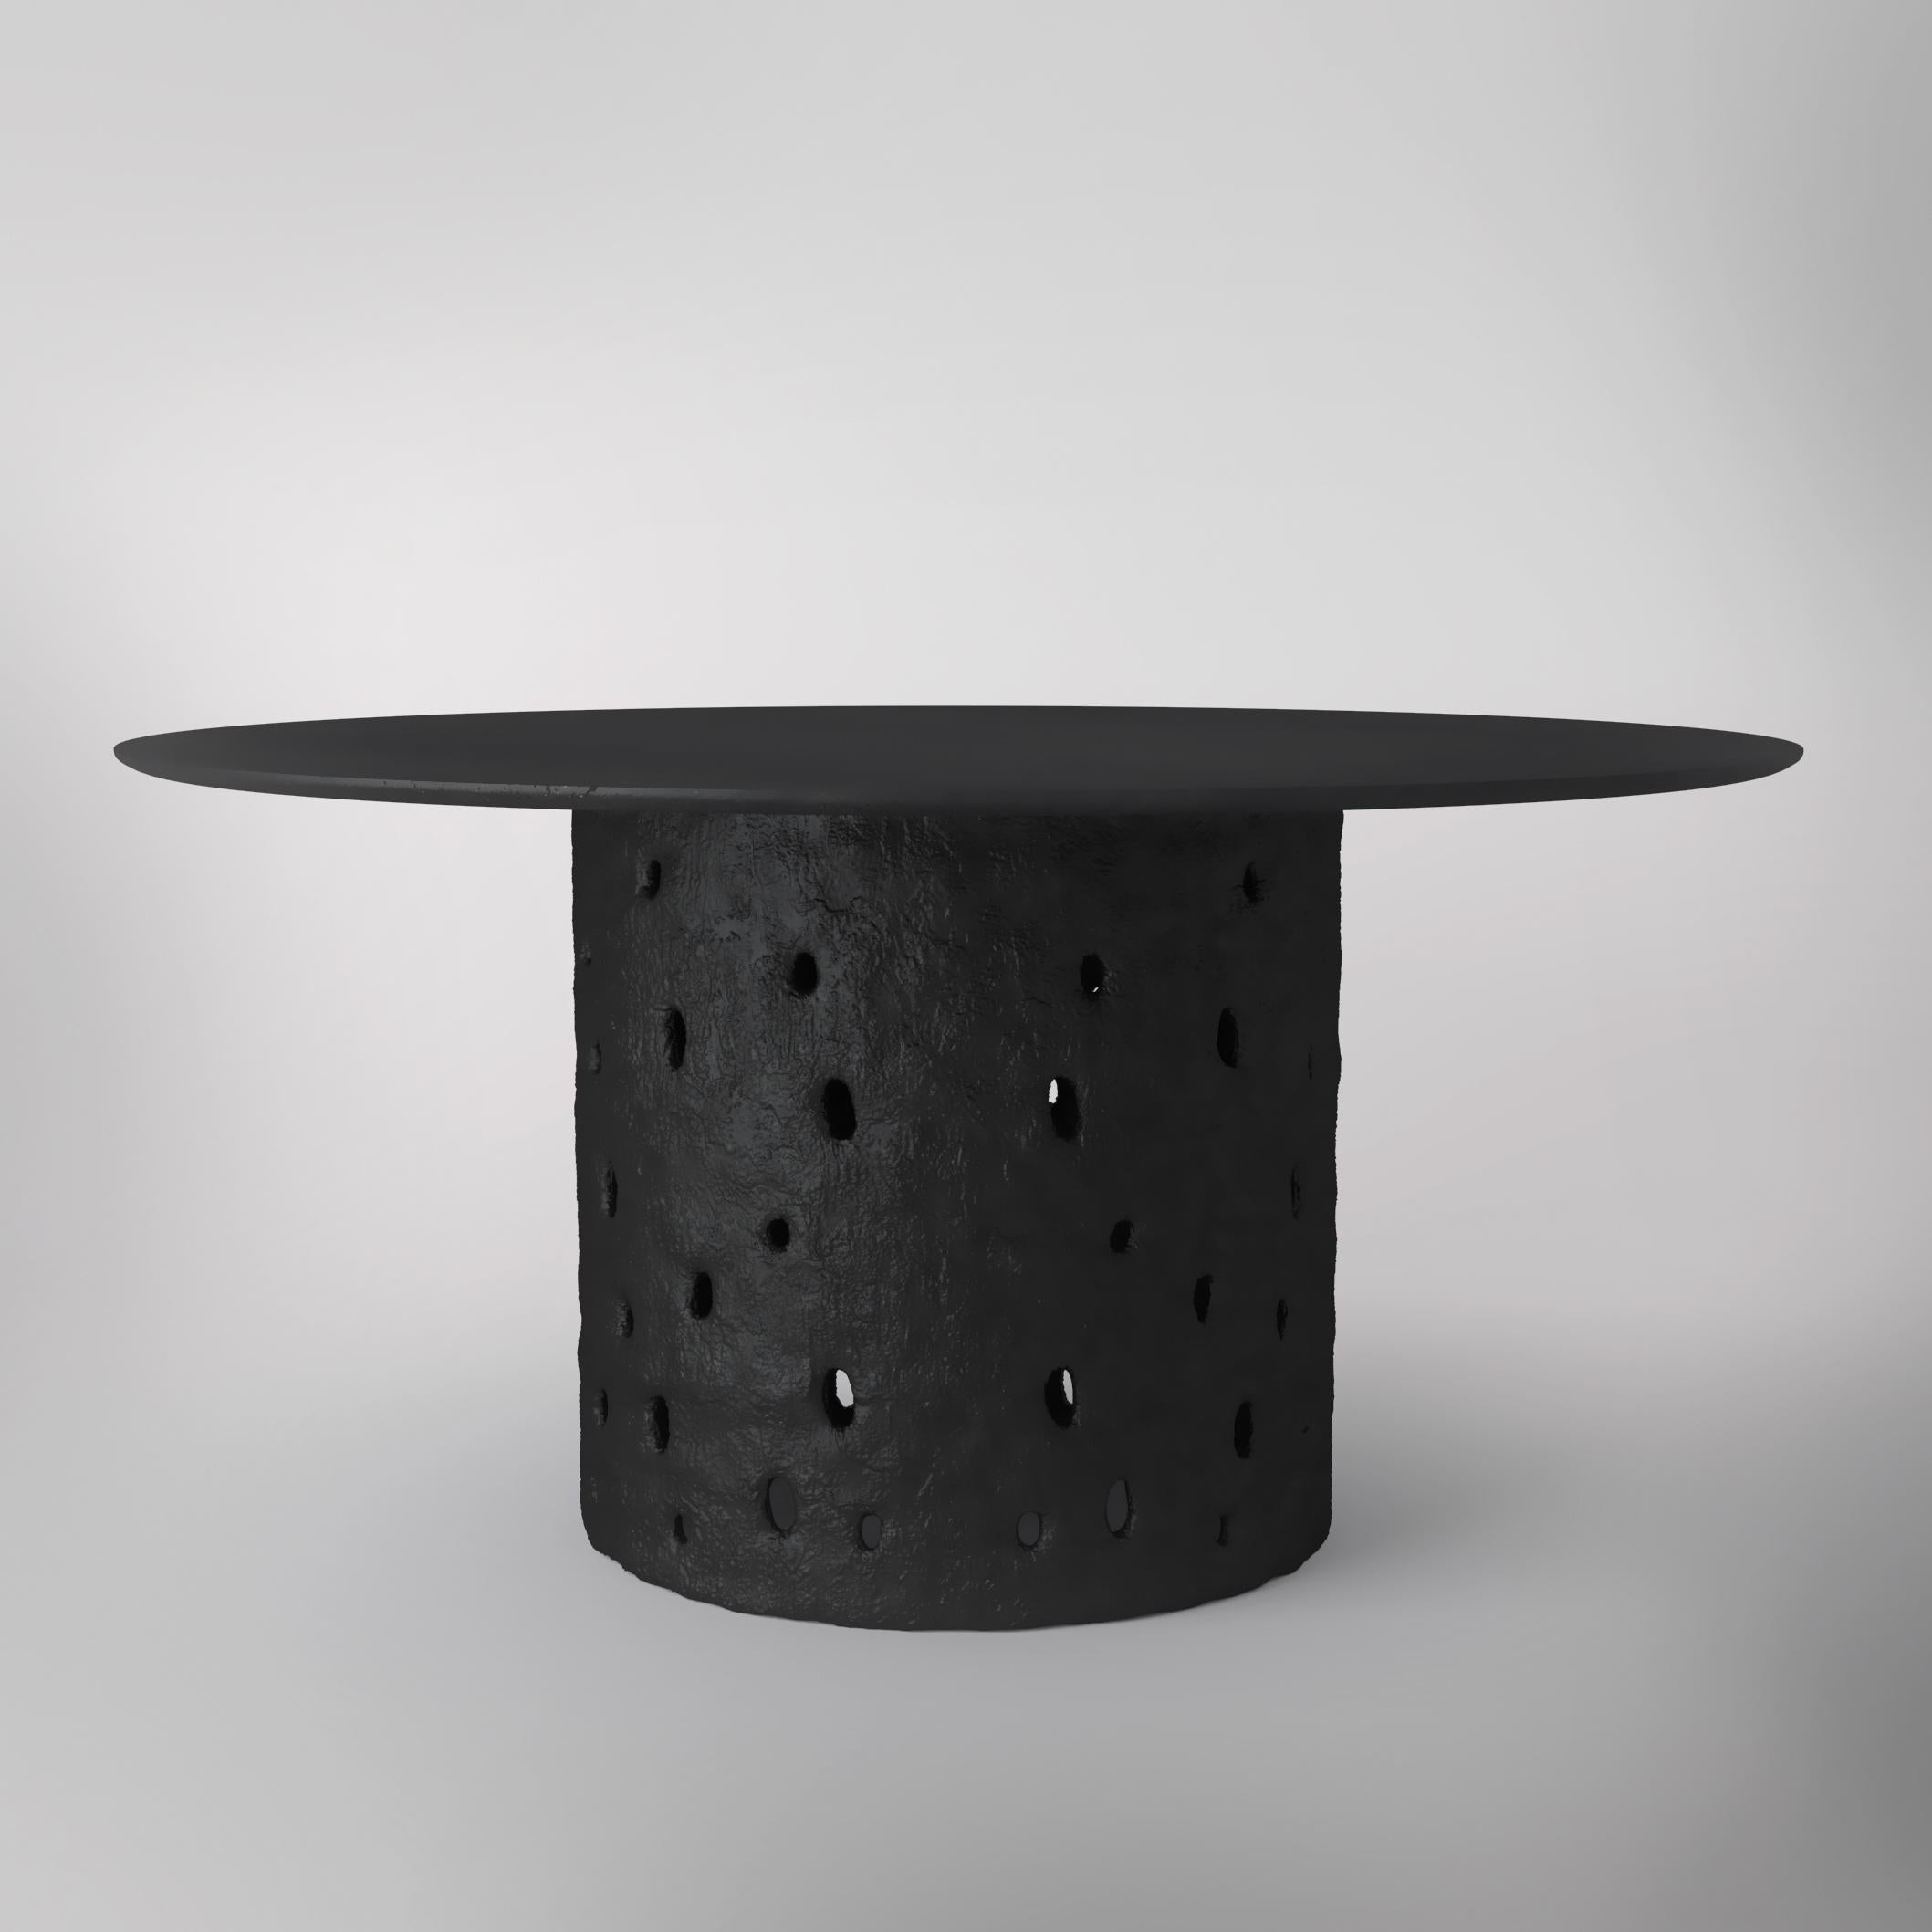 Ztista Table by Faina
Design: Victoriya Yakusha.
Dimensions: ? 150 cm x H 75 cm
Material: Upcycled steel frame and live ZTISTA material - a blend of cellulose, clay, flax fiber wood chips, biopolymer cover. Wooden table top / ash.


Made in